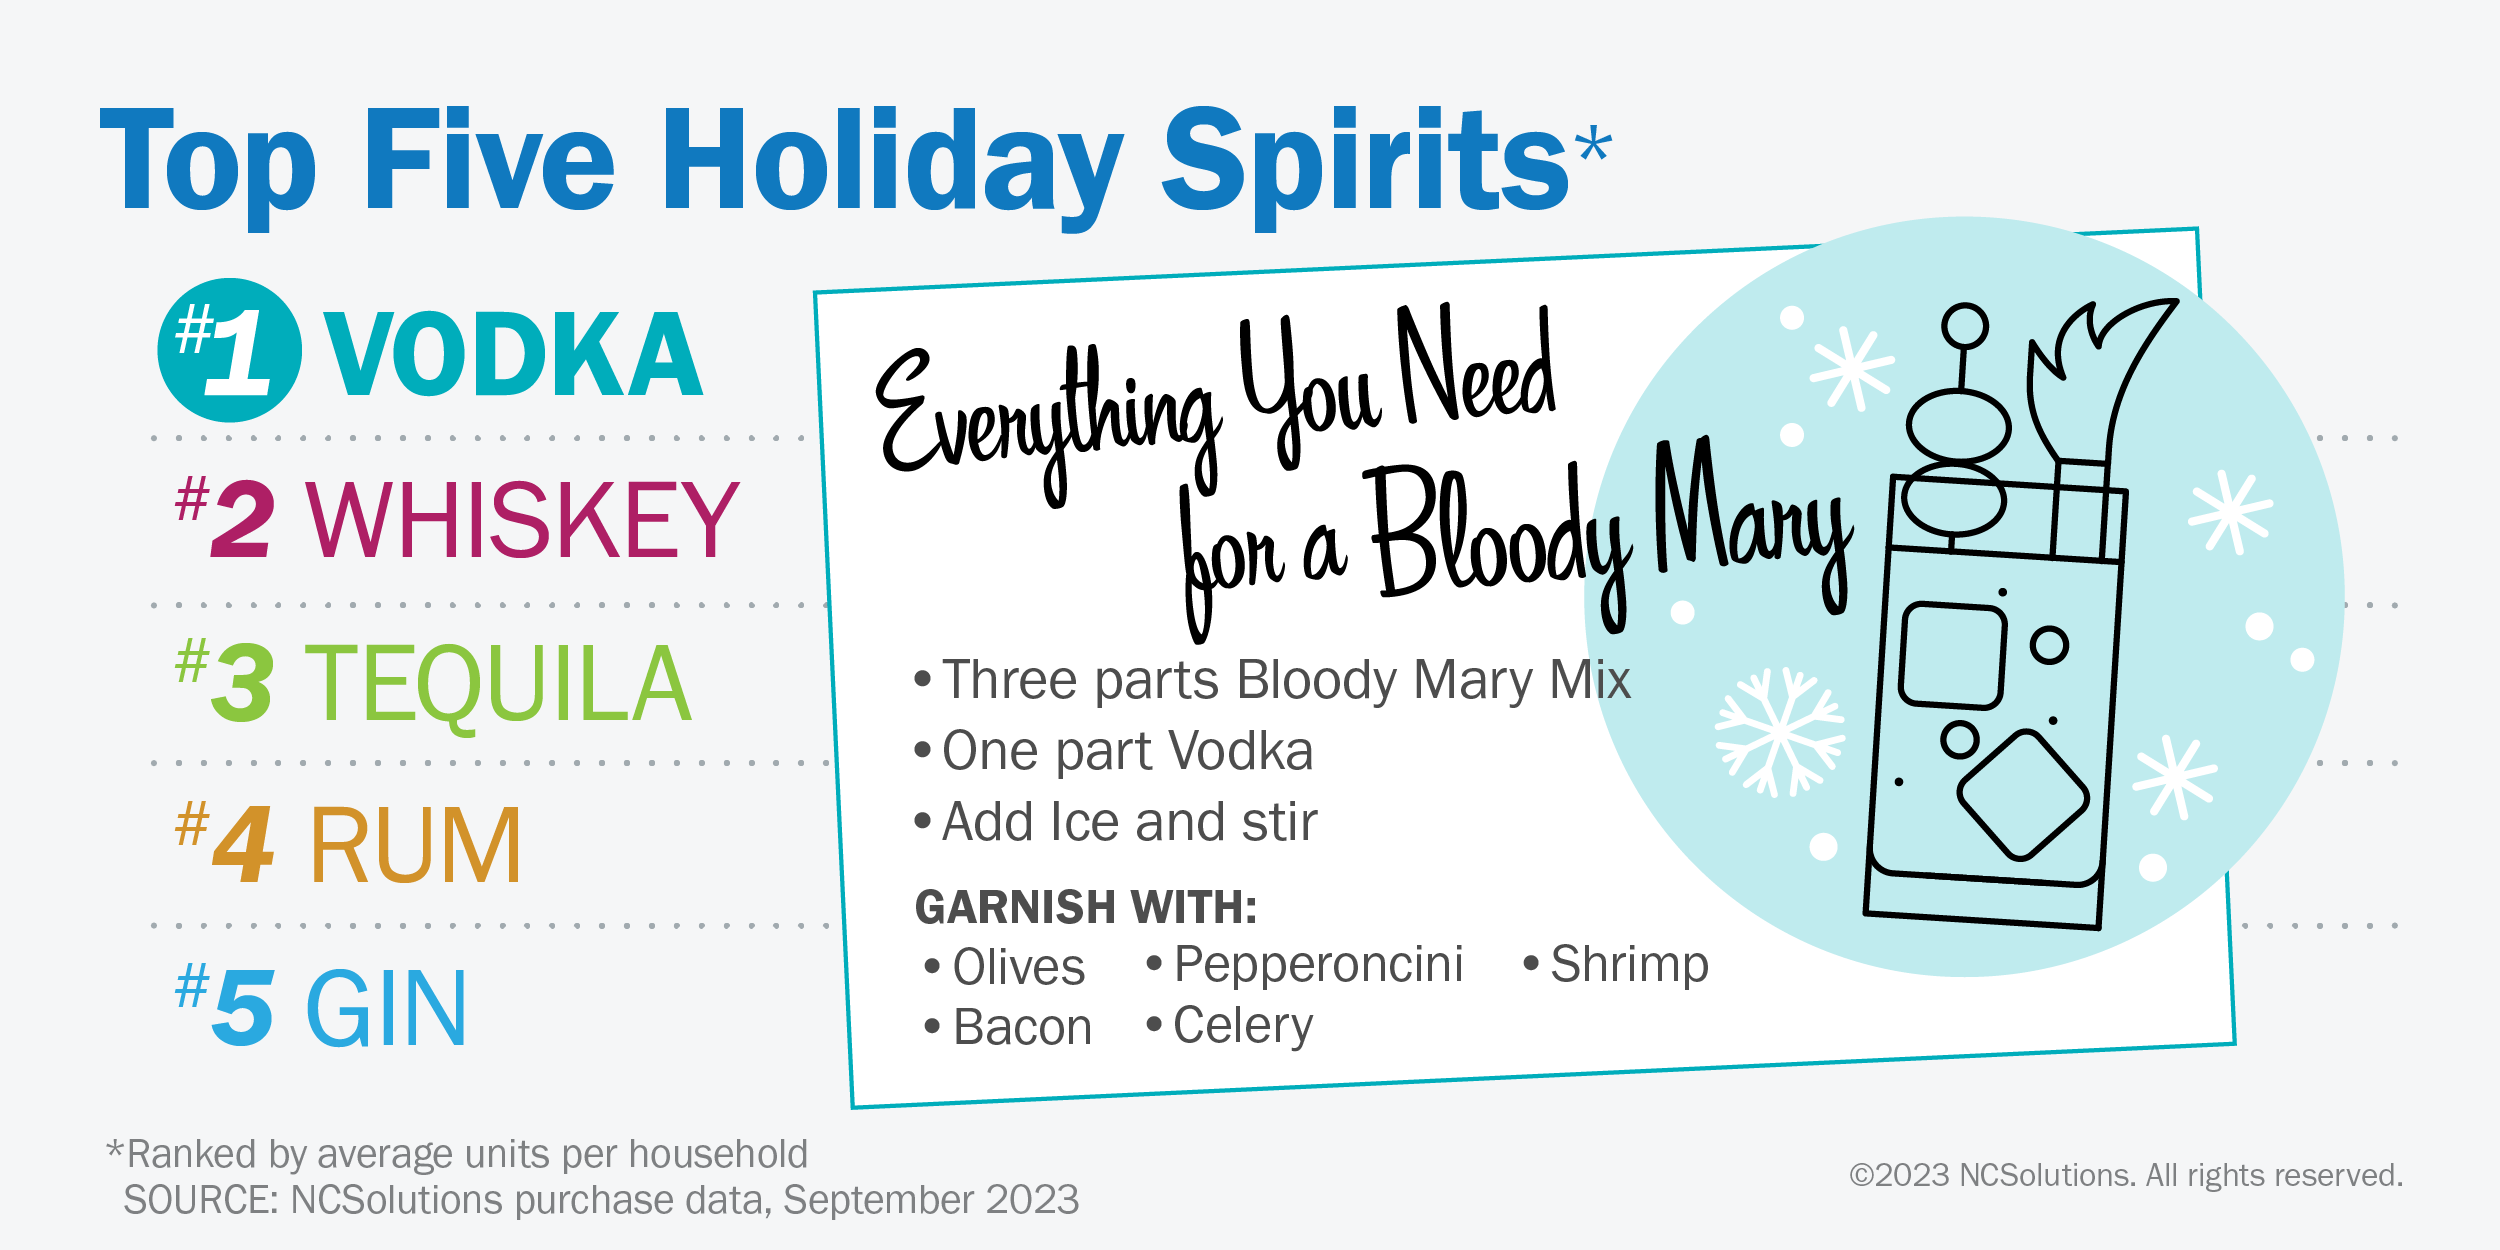 Top Five Holiday spirits are #1 Vodka, #2 Whiskey, #3 Tequila, #4 Rum, and #5 Gin, followed by a recipe for a Bloody Mary